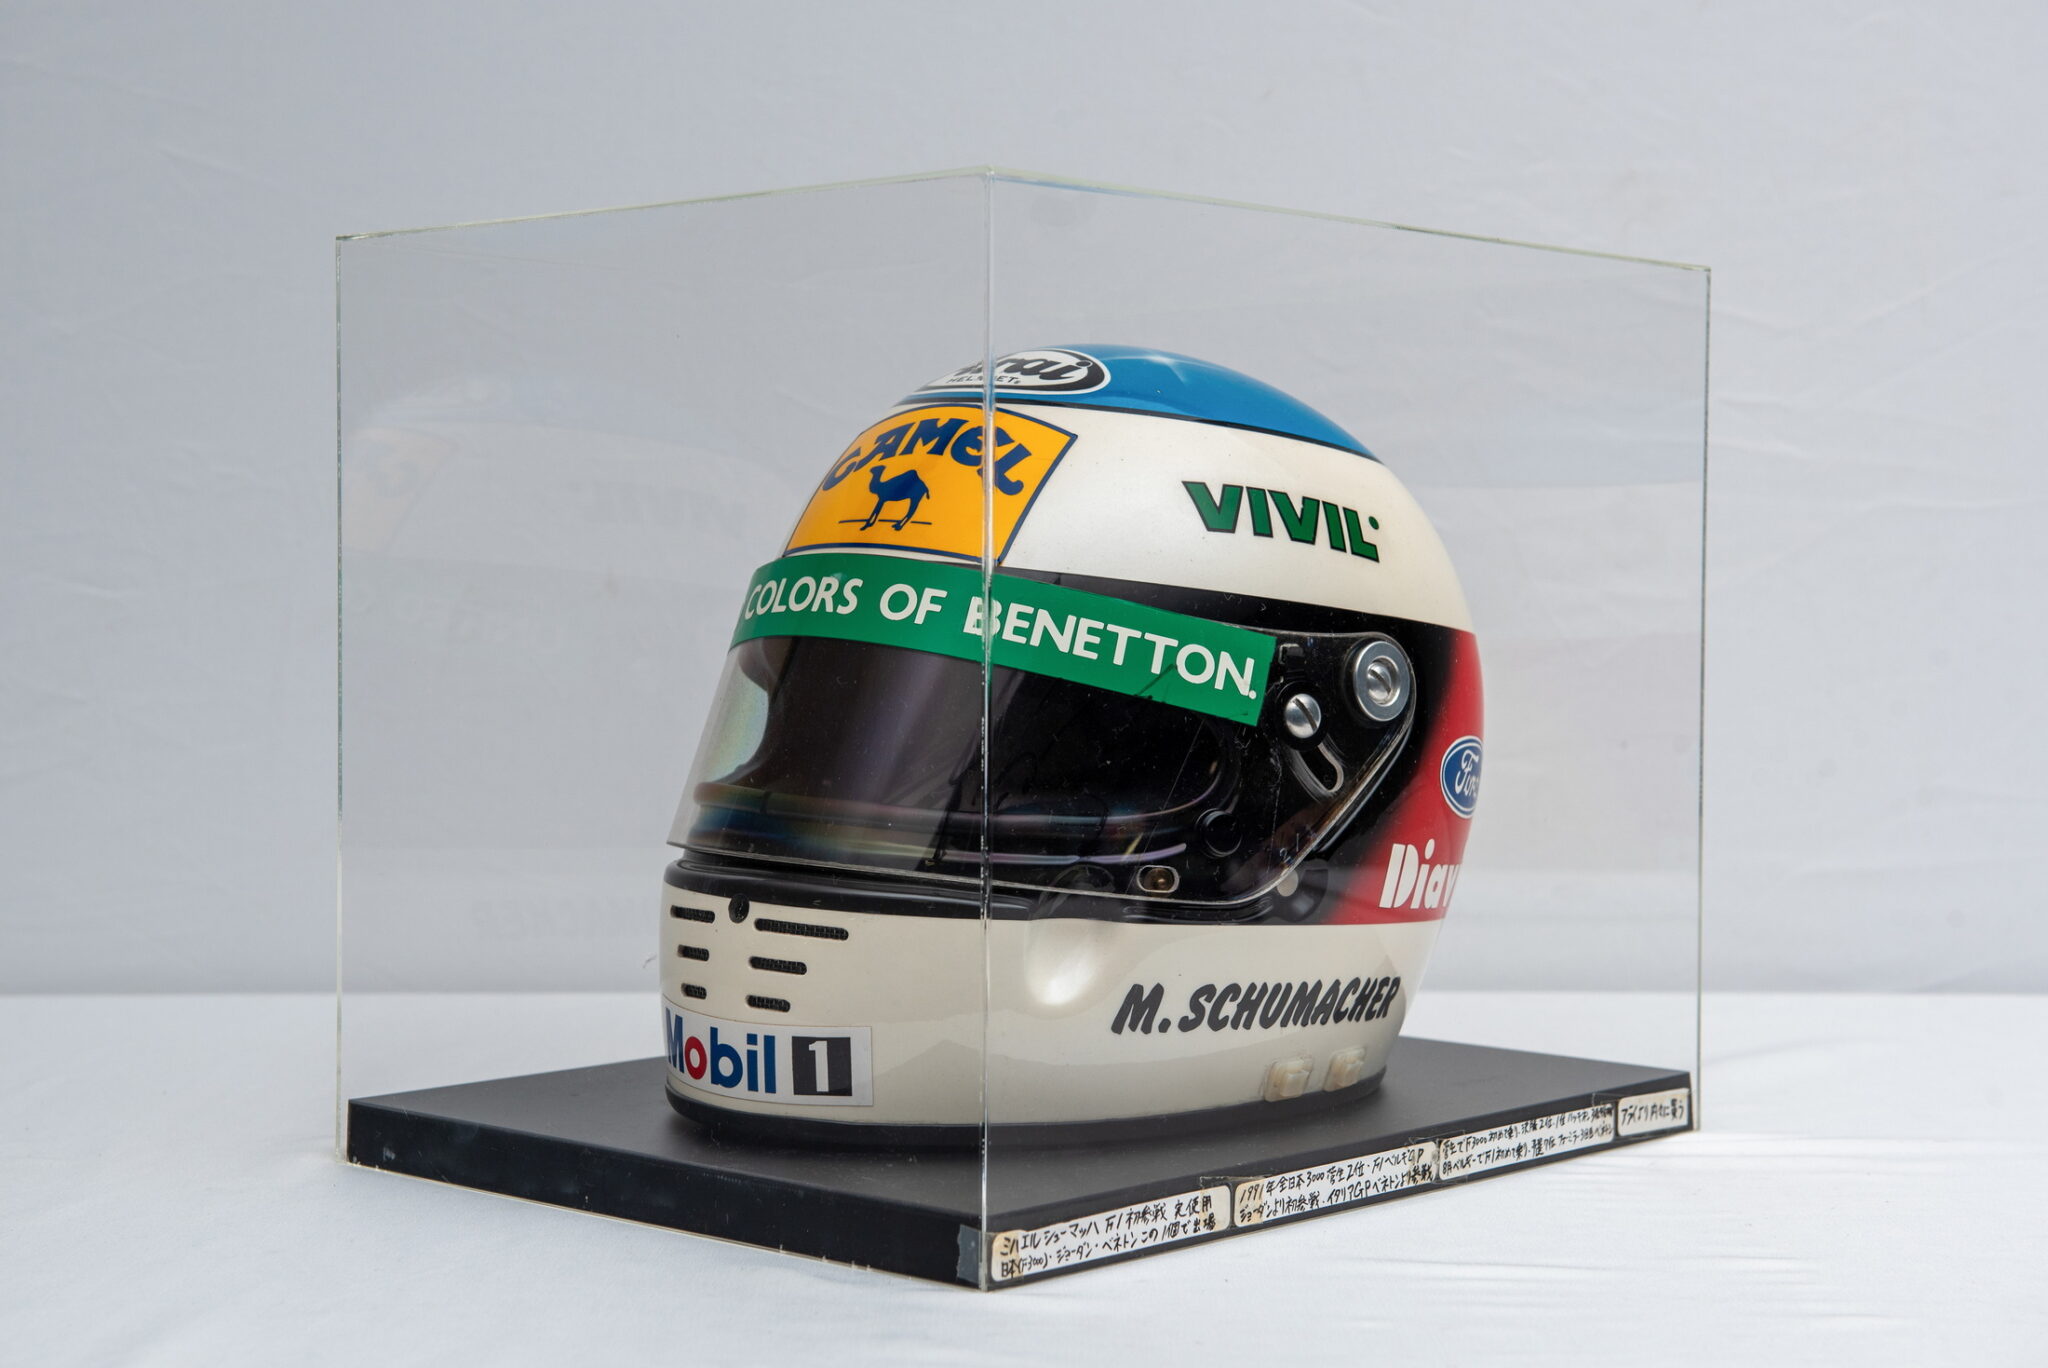 The Ultimate Collection Of Schumacher Memorabilia Is An F1 Fan’s Dream ...